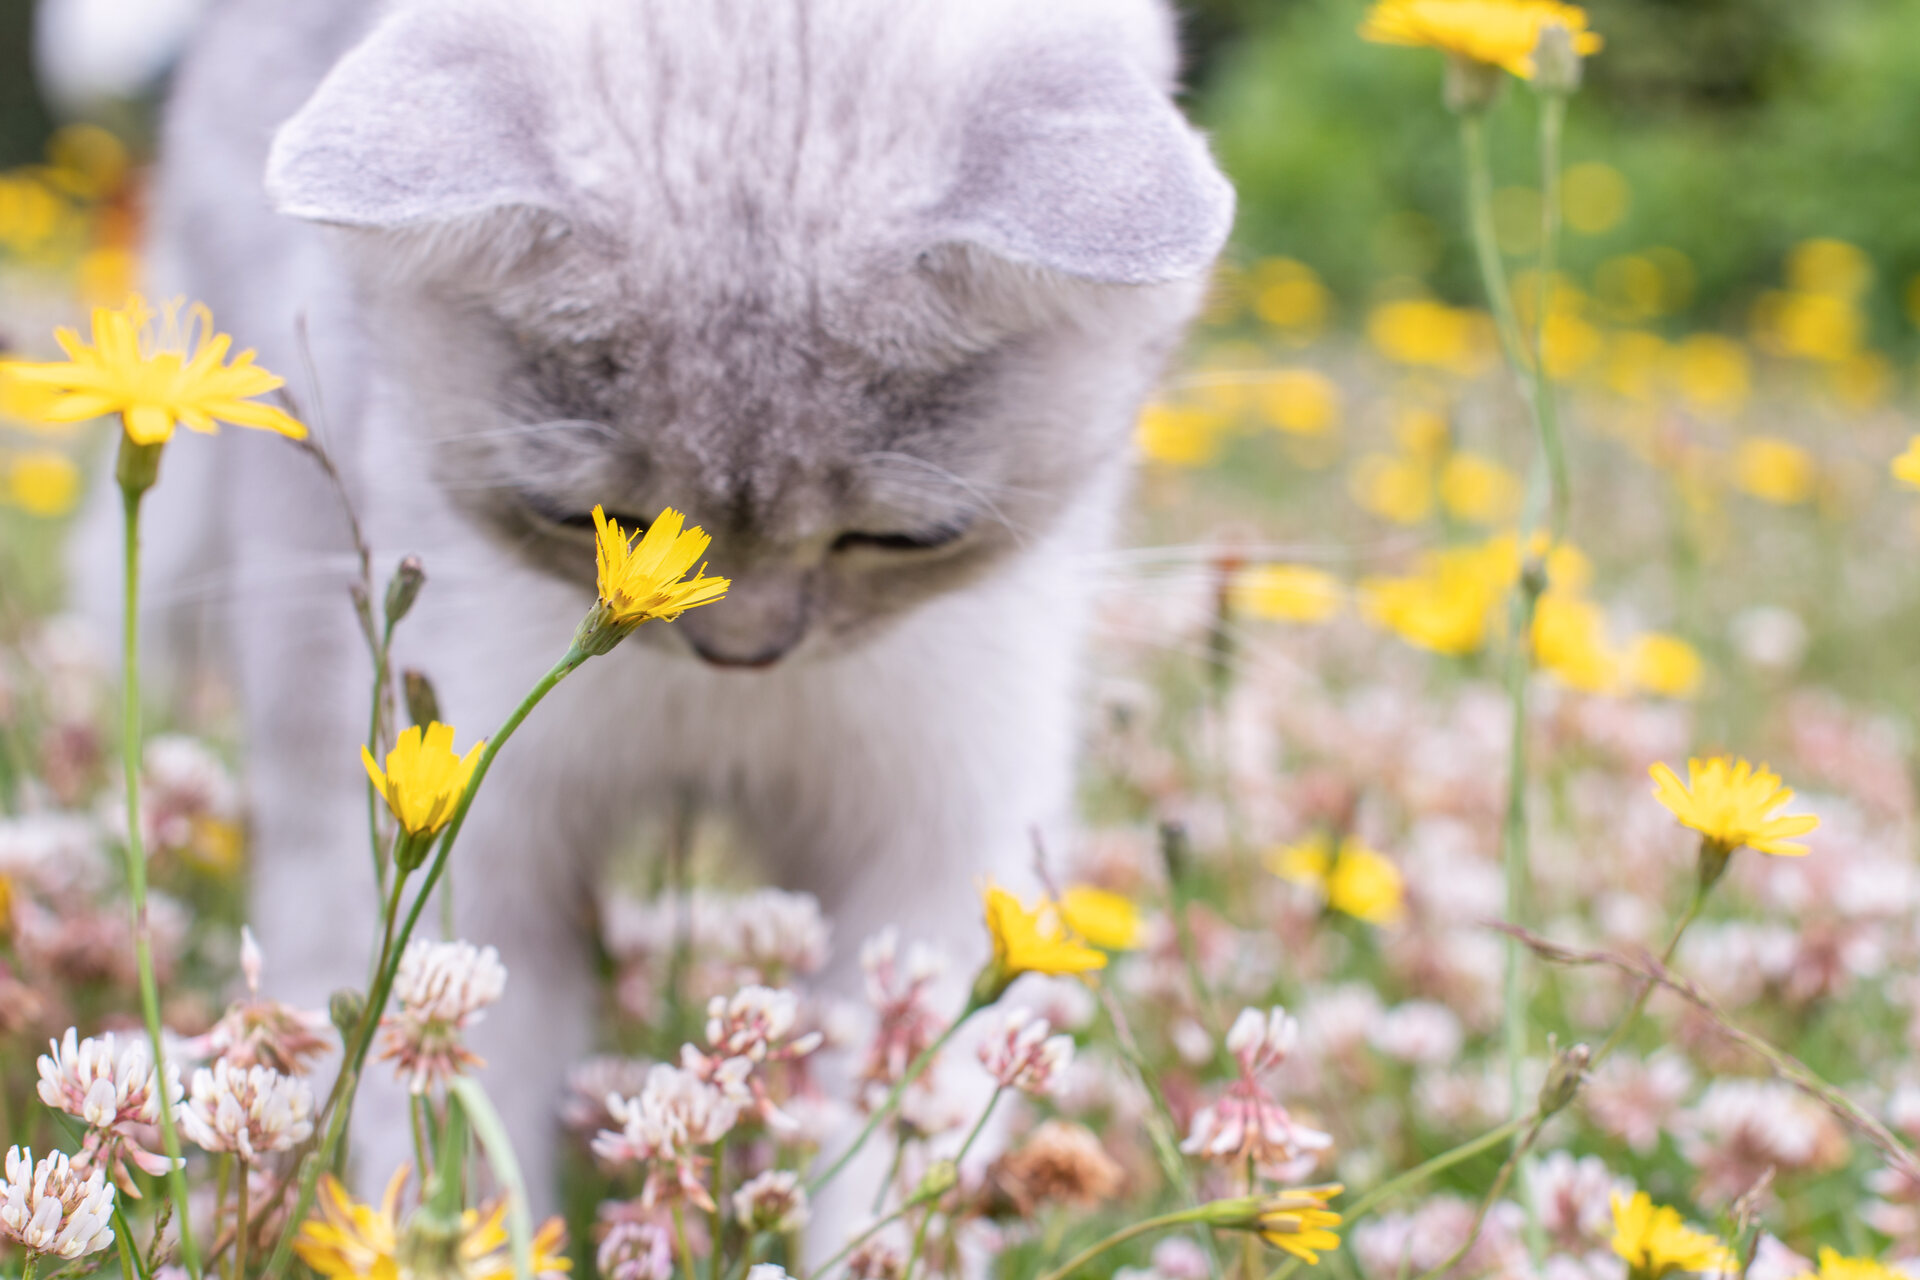 A cat sniffing a field of spring flowers